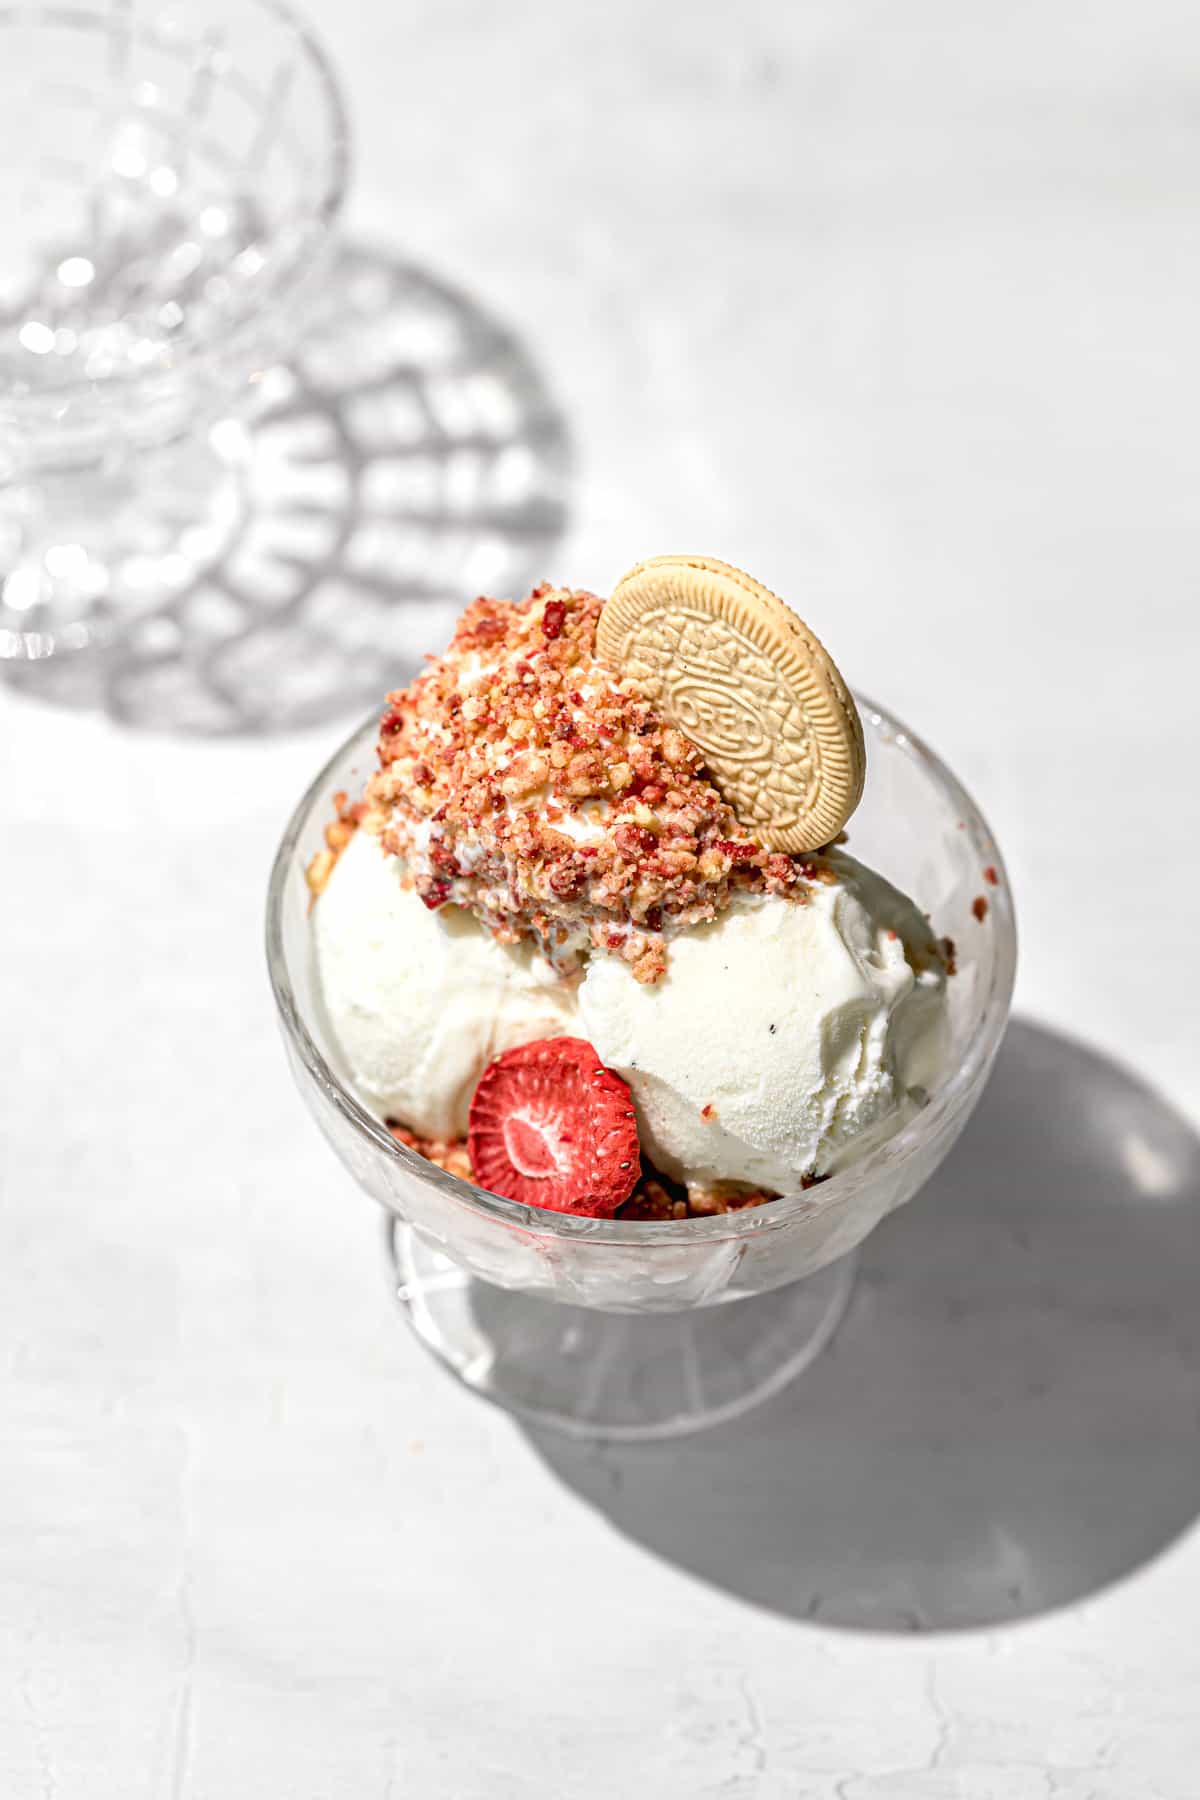 ice cream rolled in strawberry shortcake crunch in glass bowl.